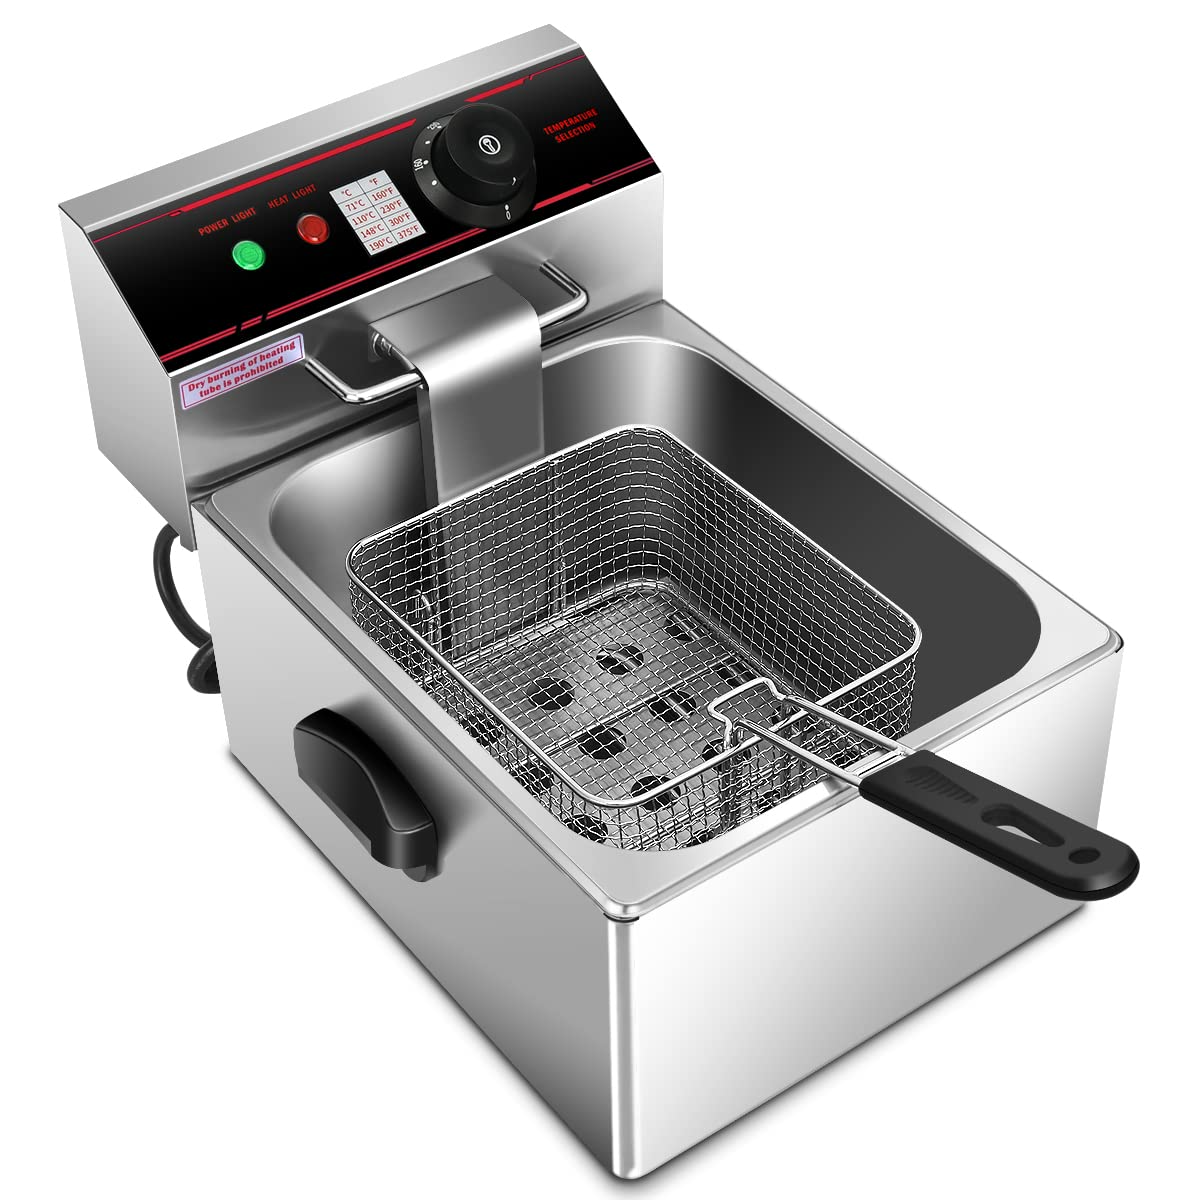 Electric Deep Fryer 5.3QT/21-Cup Stainless Steel 1700W with Triple Basket